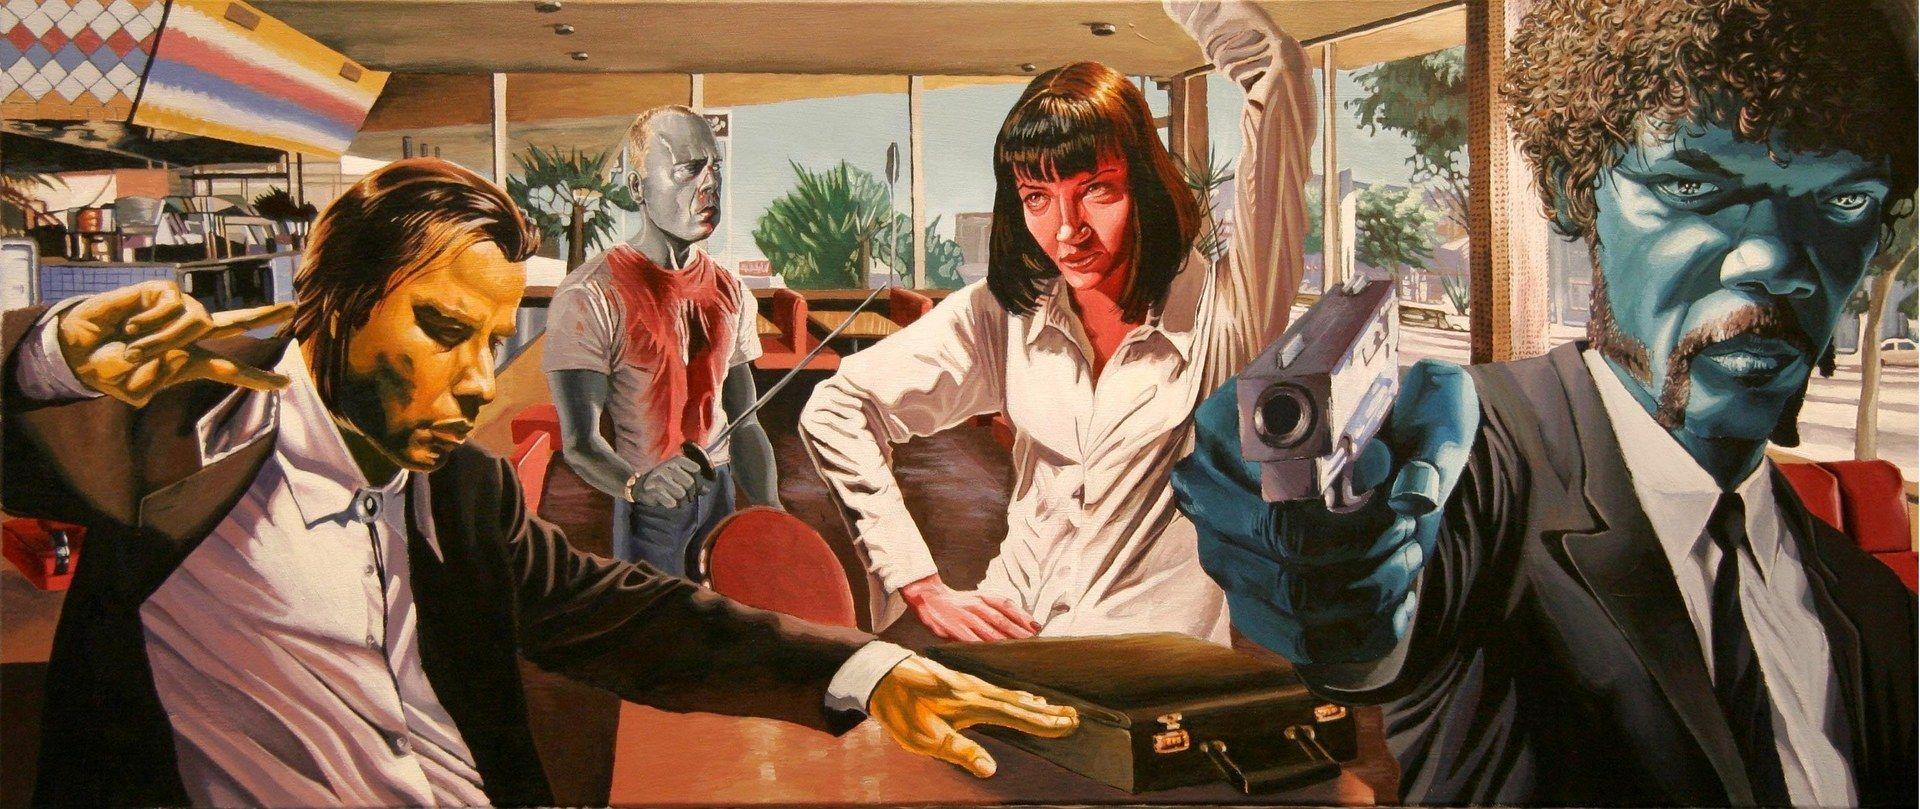 Pulp Fiction image Pulp Fiction HD wallpaper and background photo